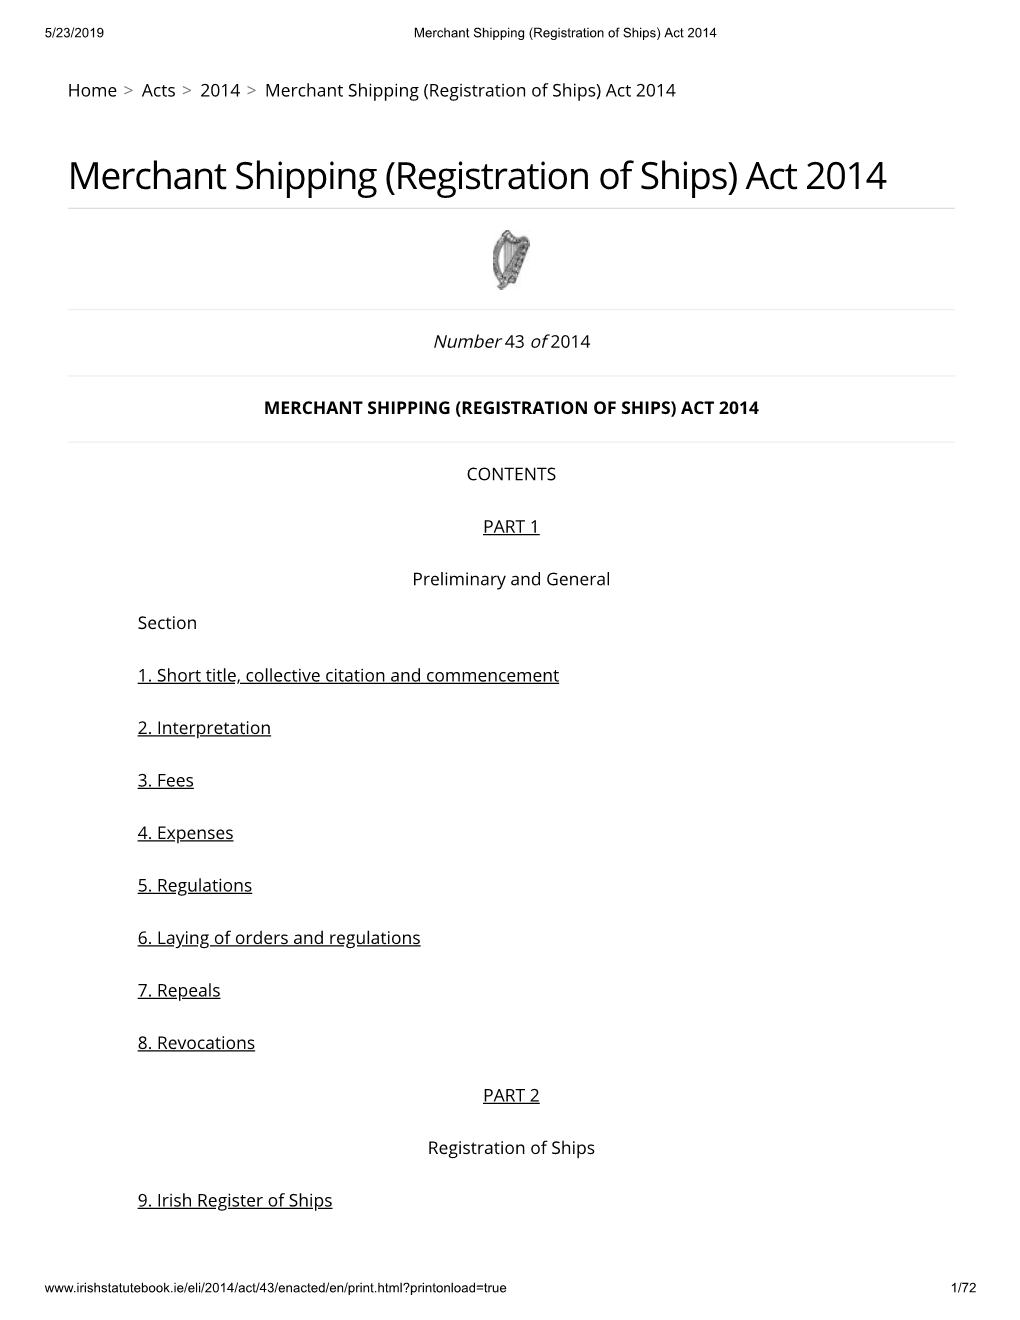 Merchant Shipping (Registration of Ships) Act 2014